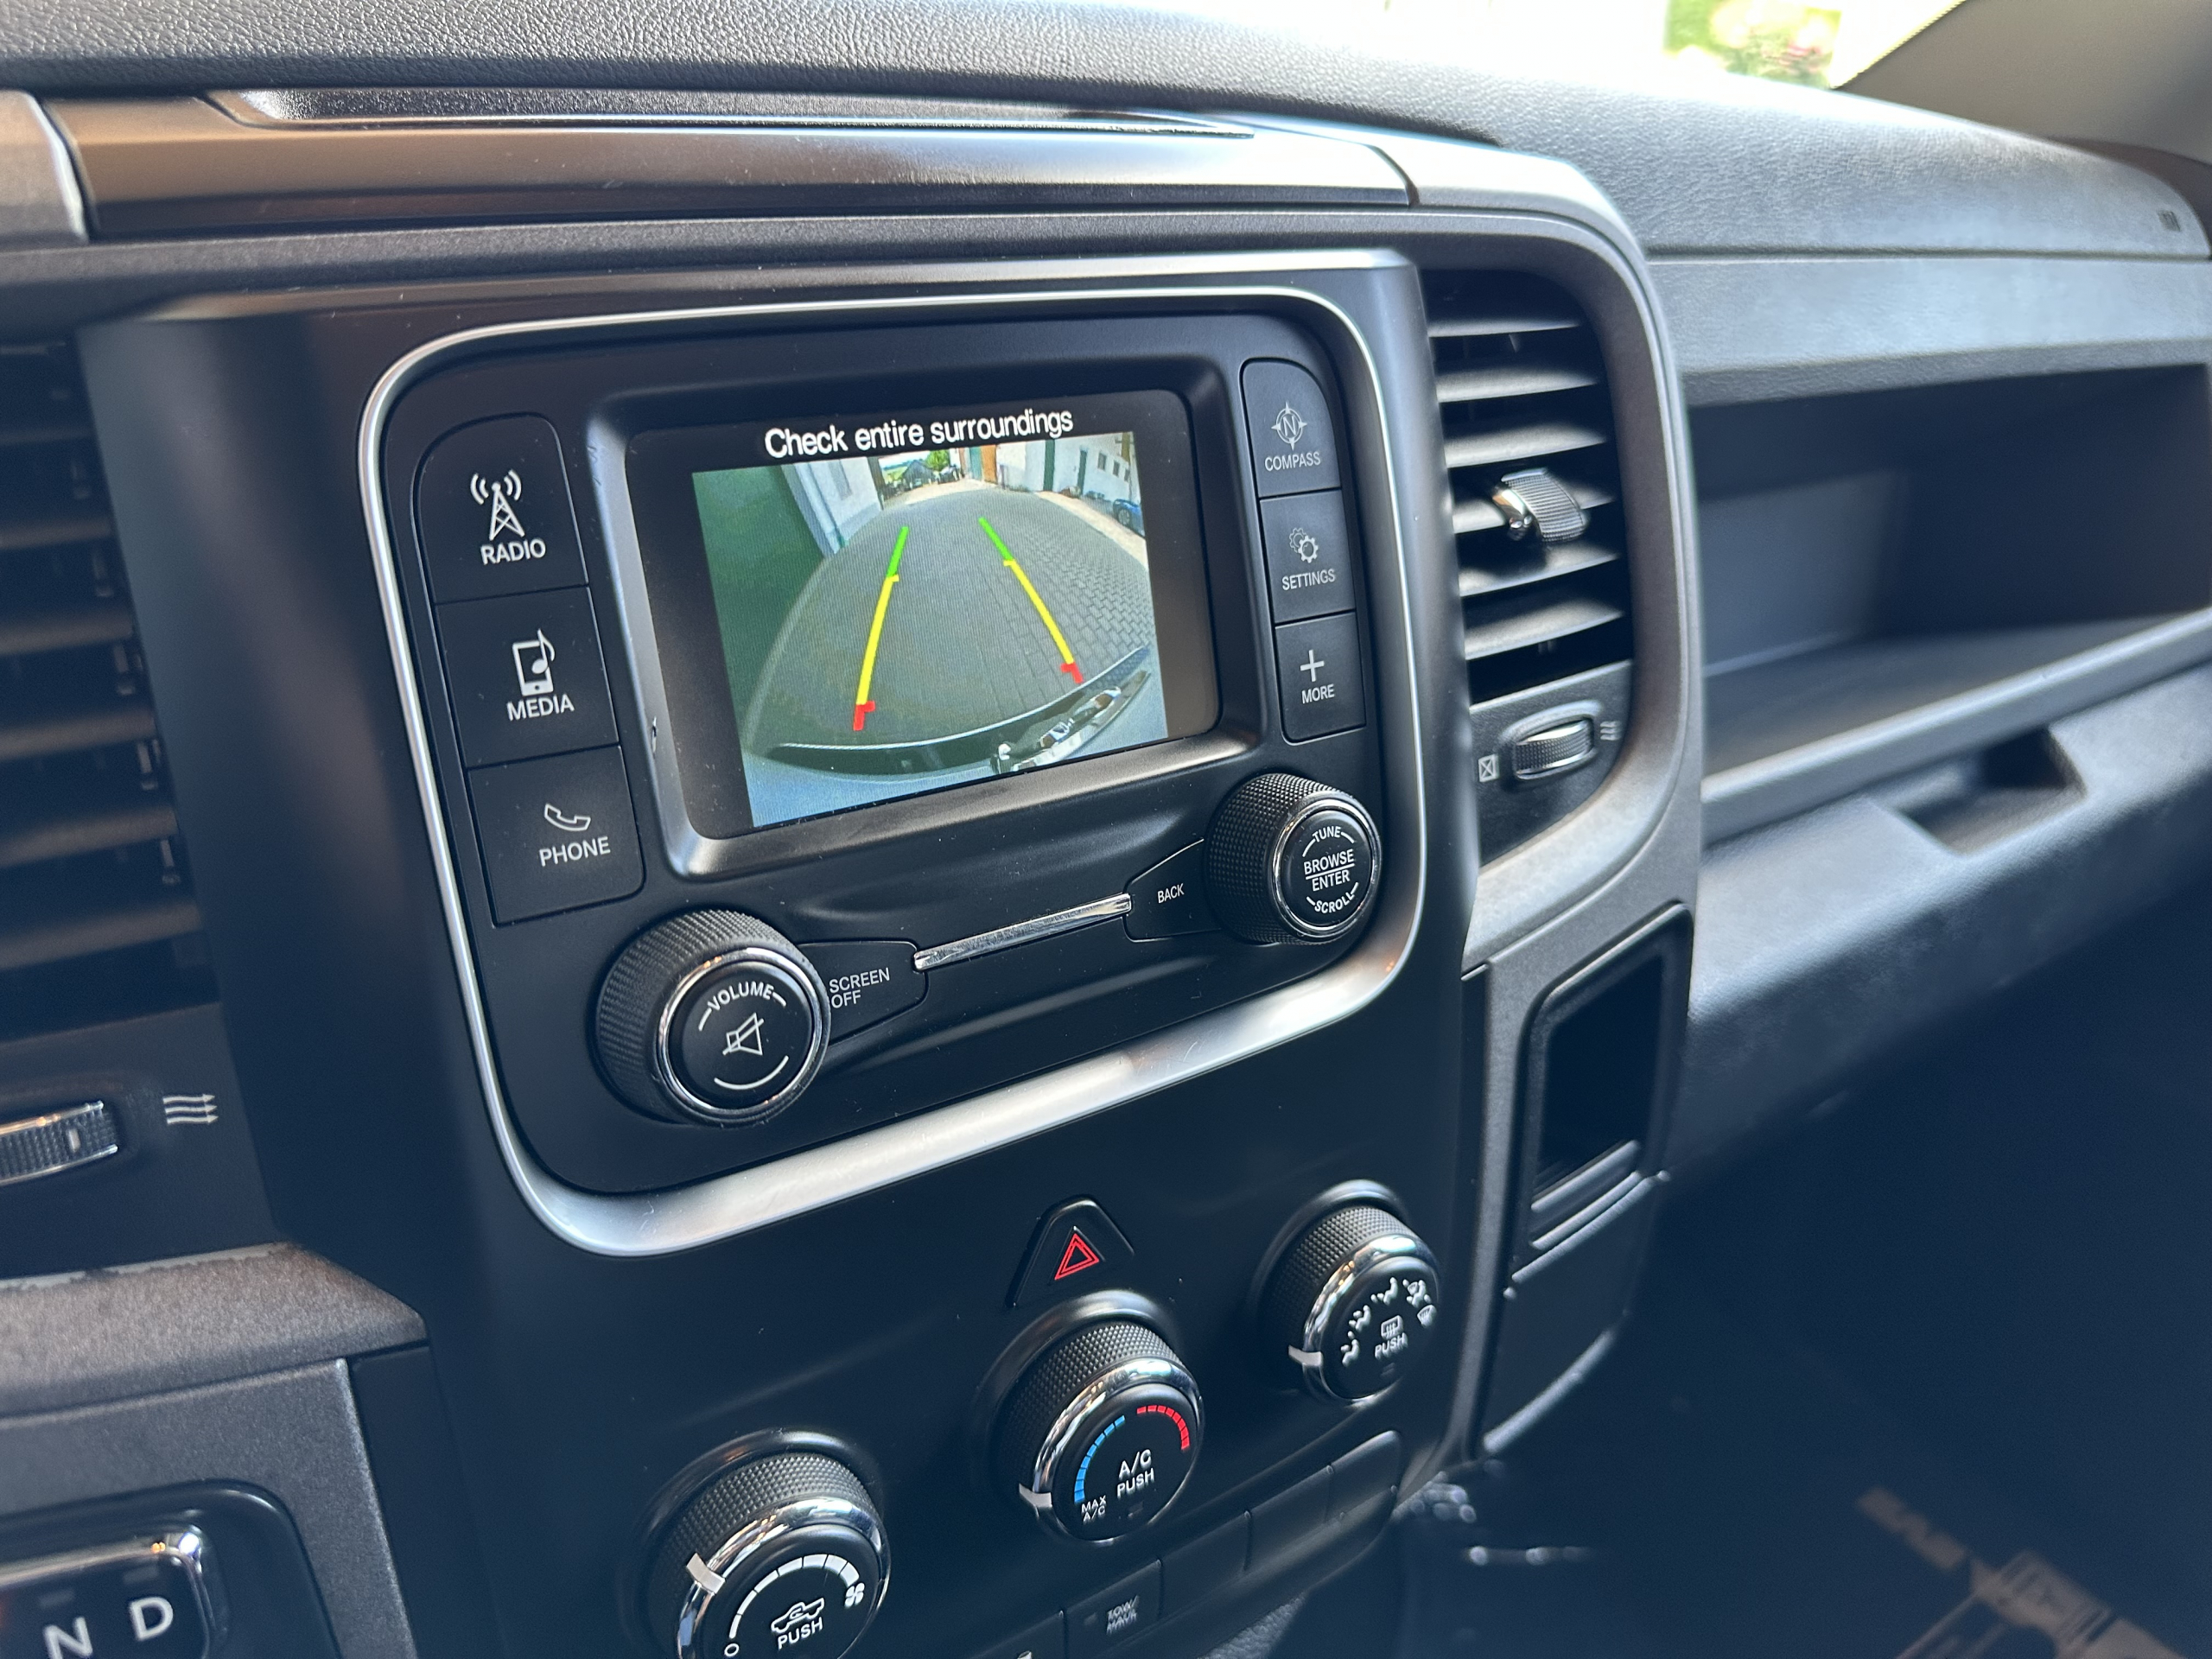 2018 Dodge Ram 1500 4x4 for sale in Oslo, Norway